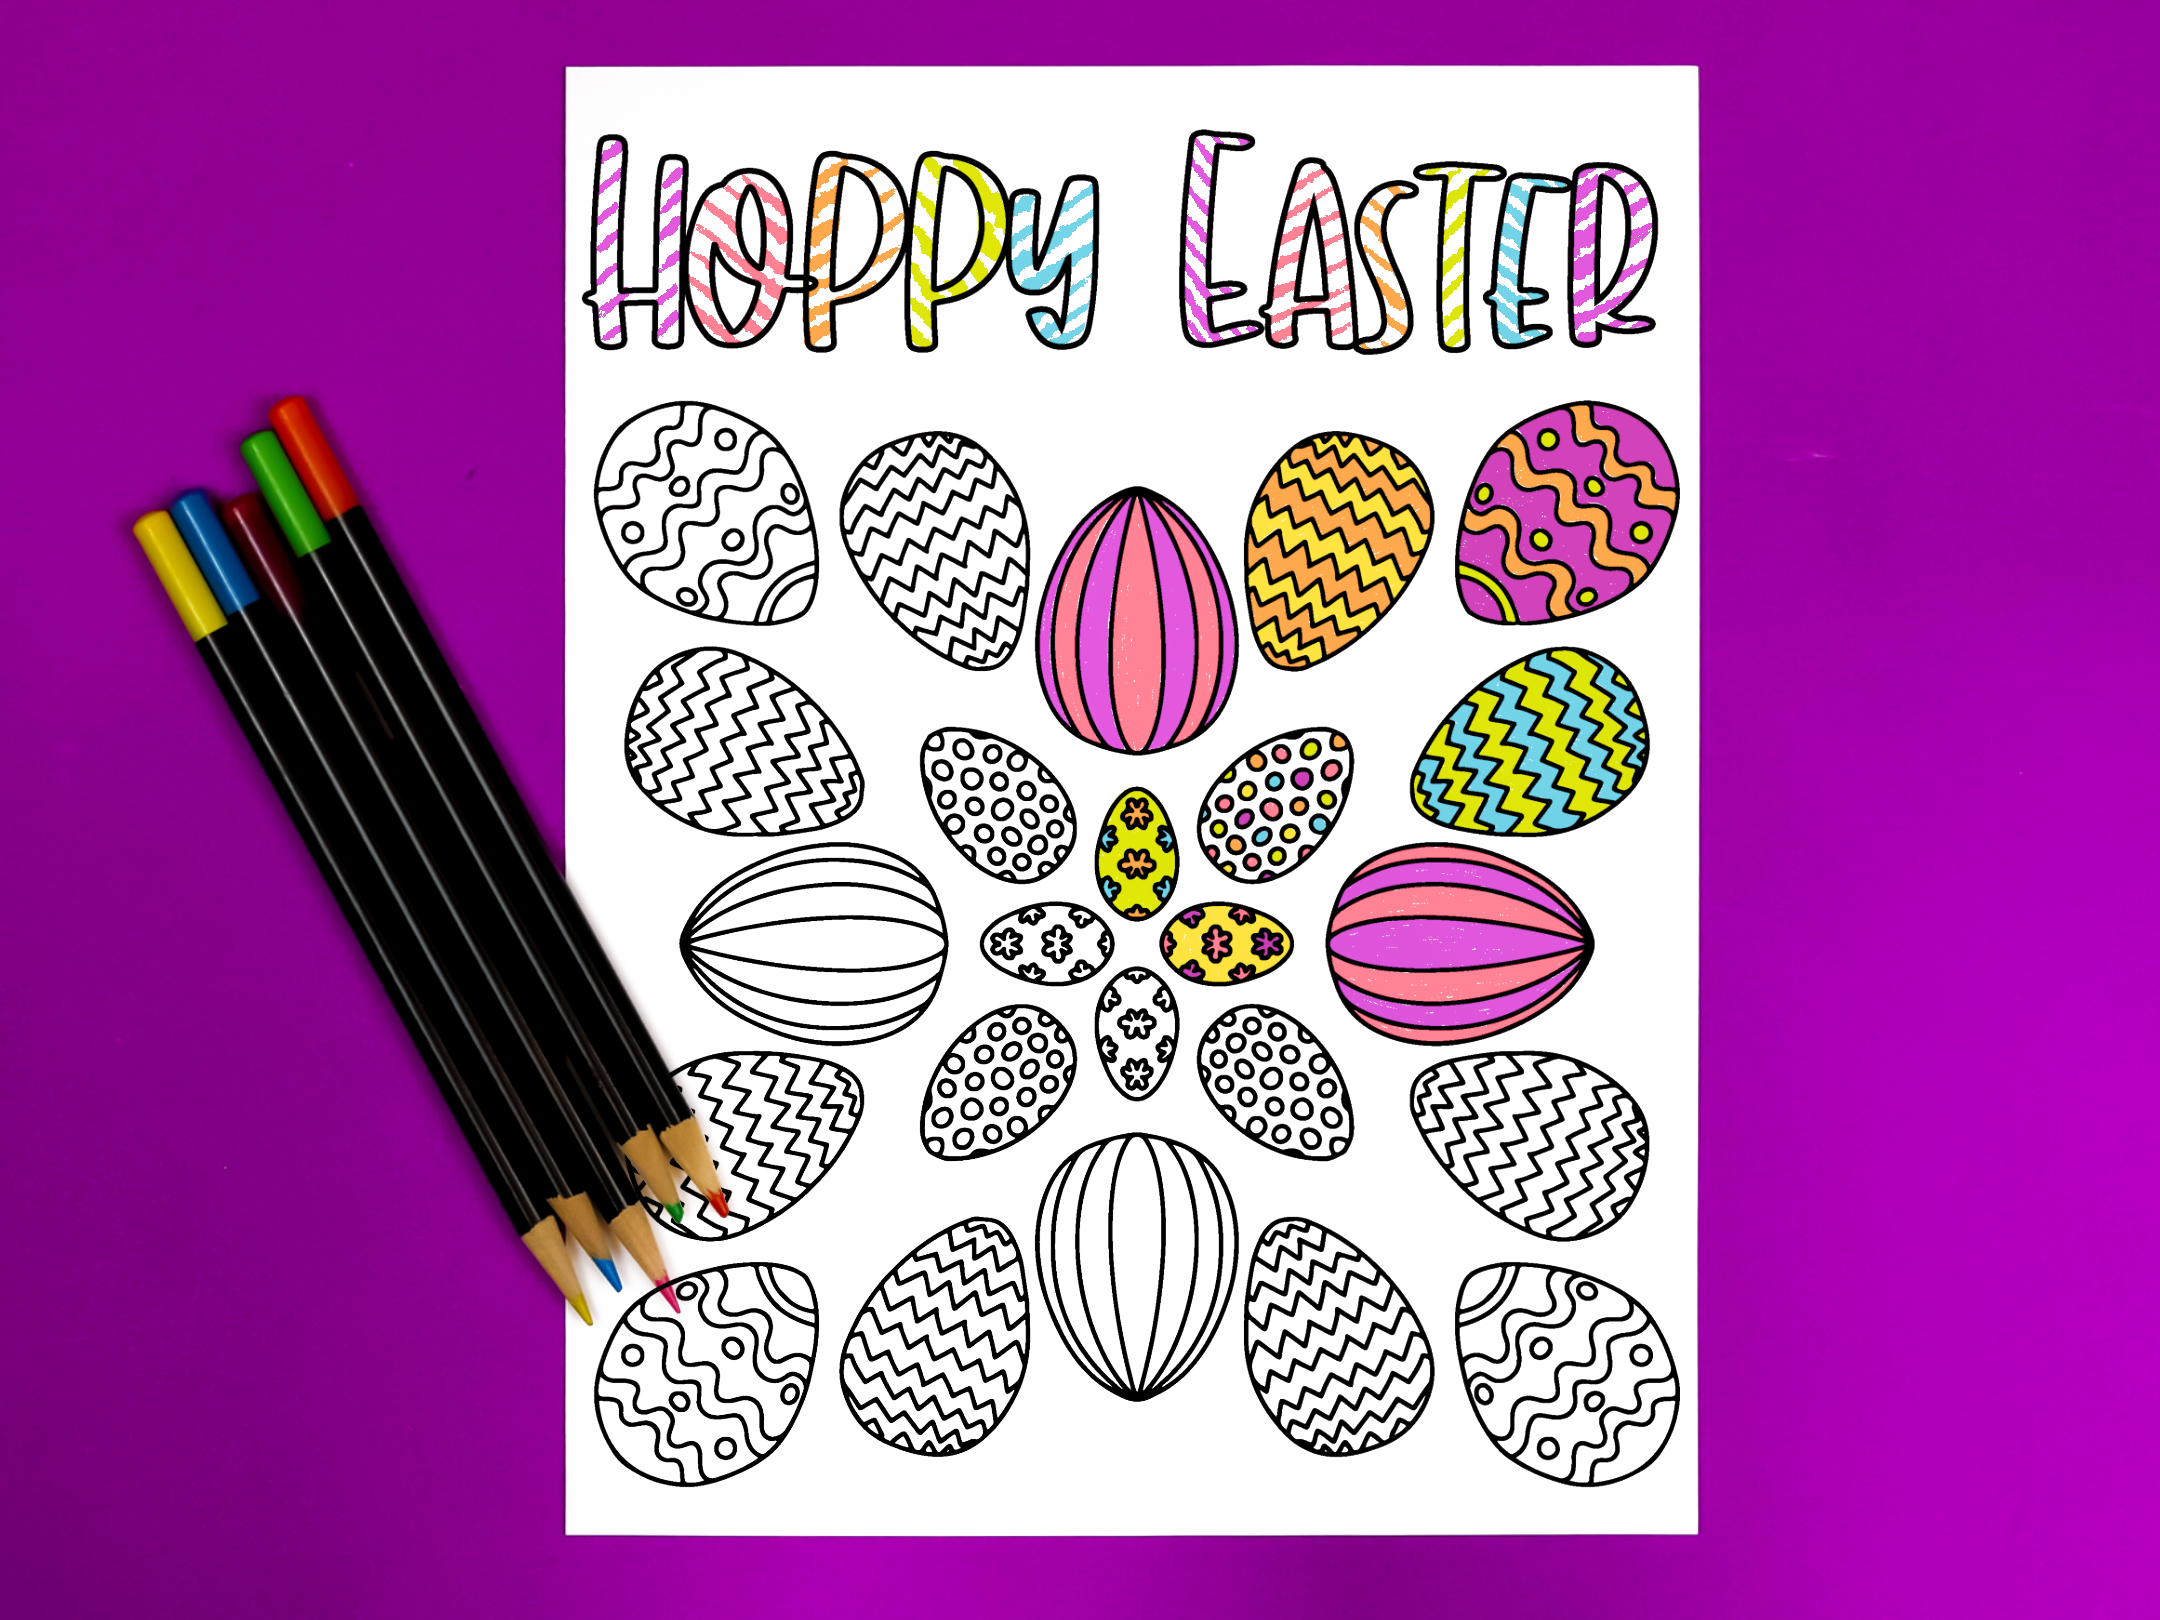 Hoppy Easter coloring page